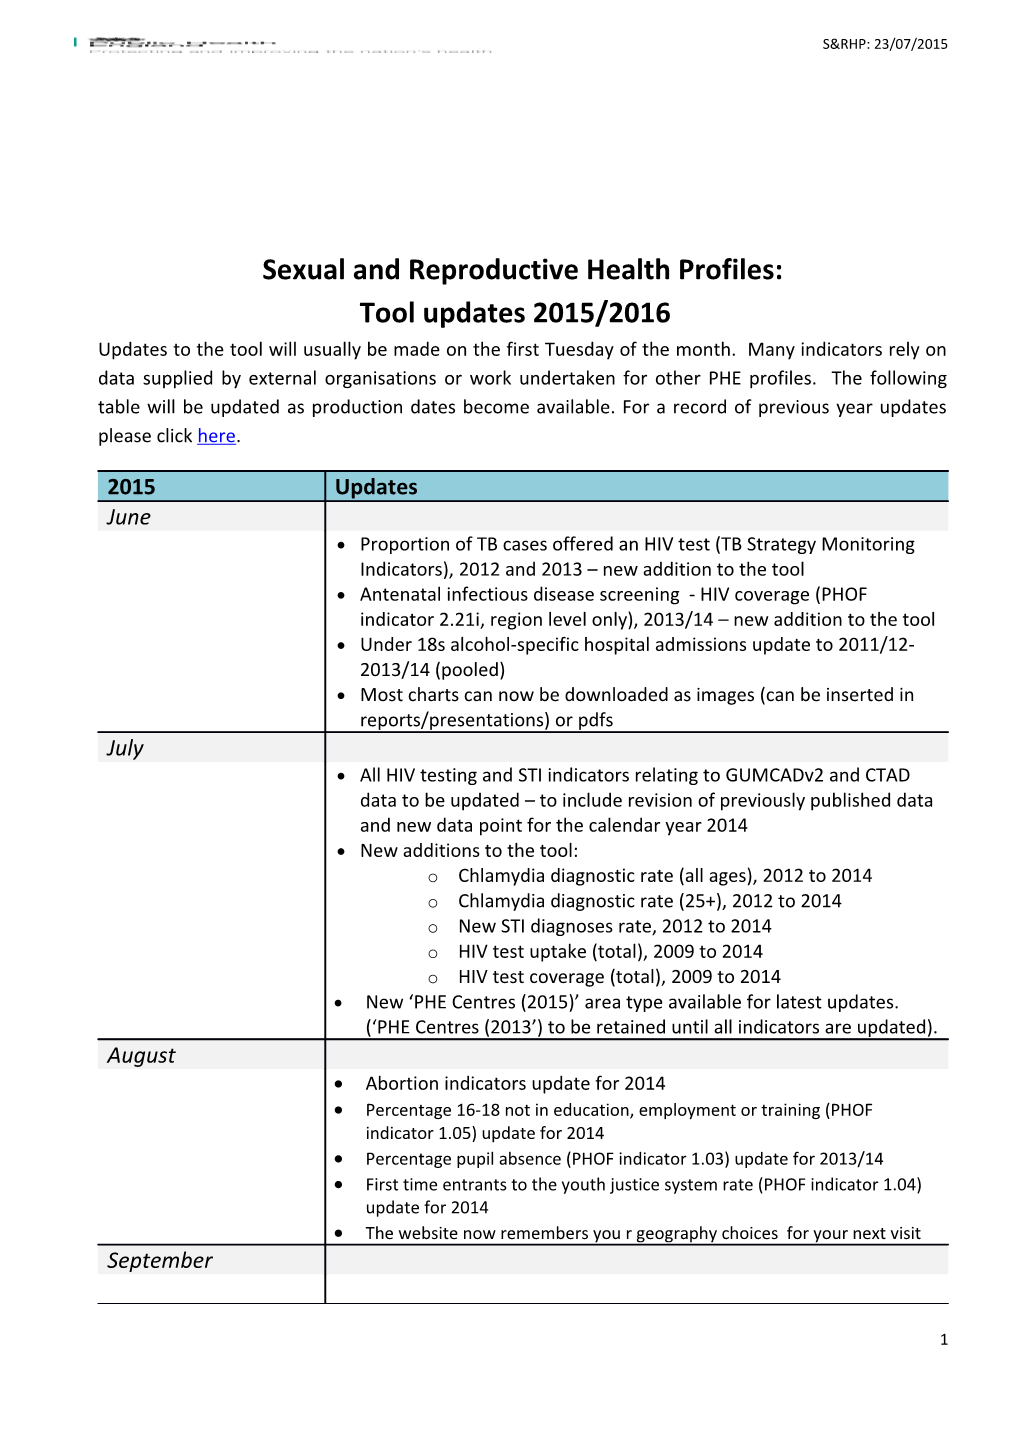 Sexual and Reproductive Health Profiles: Planned Indicator Updates 2014/2015